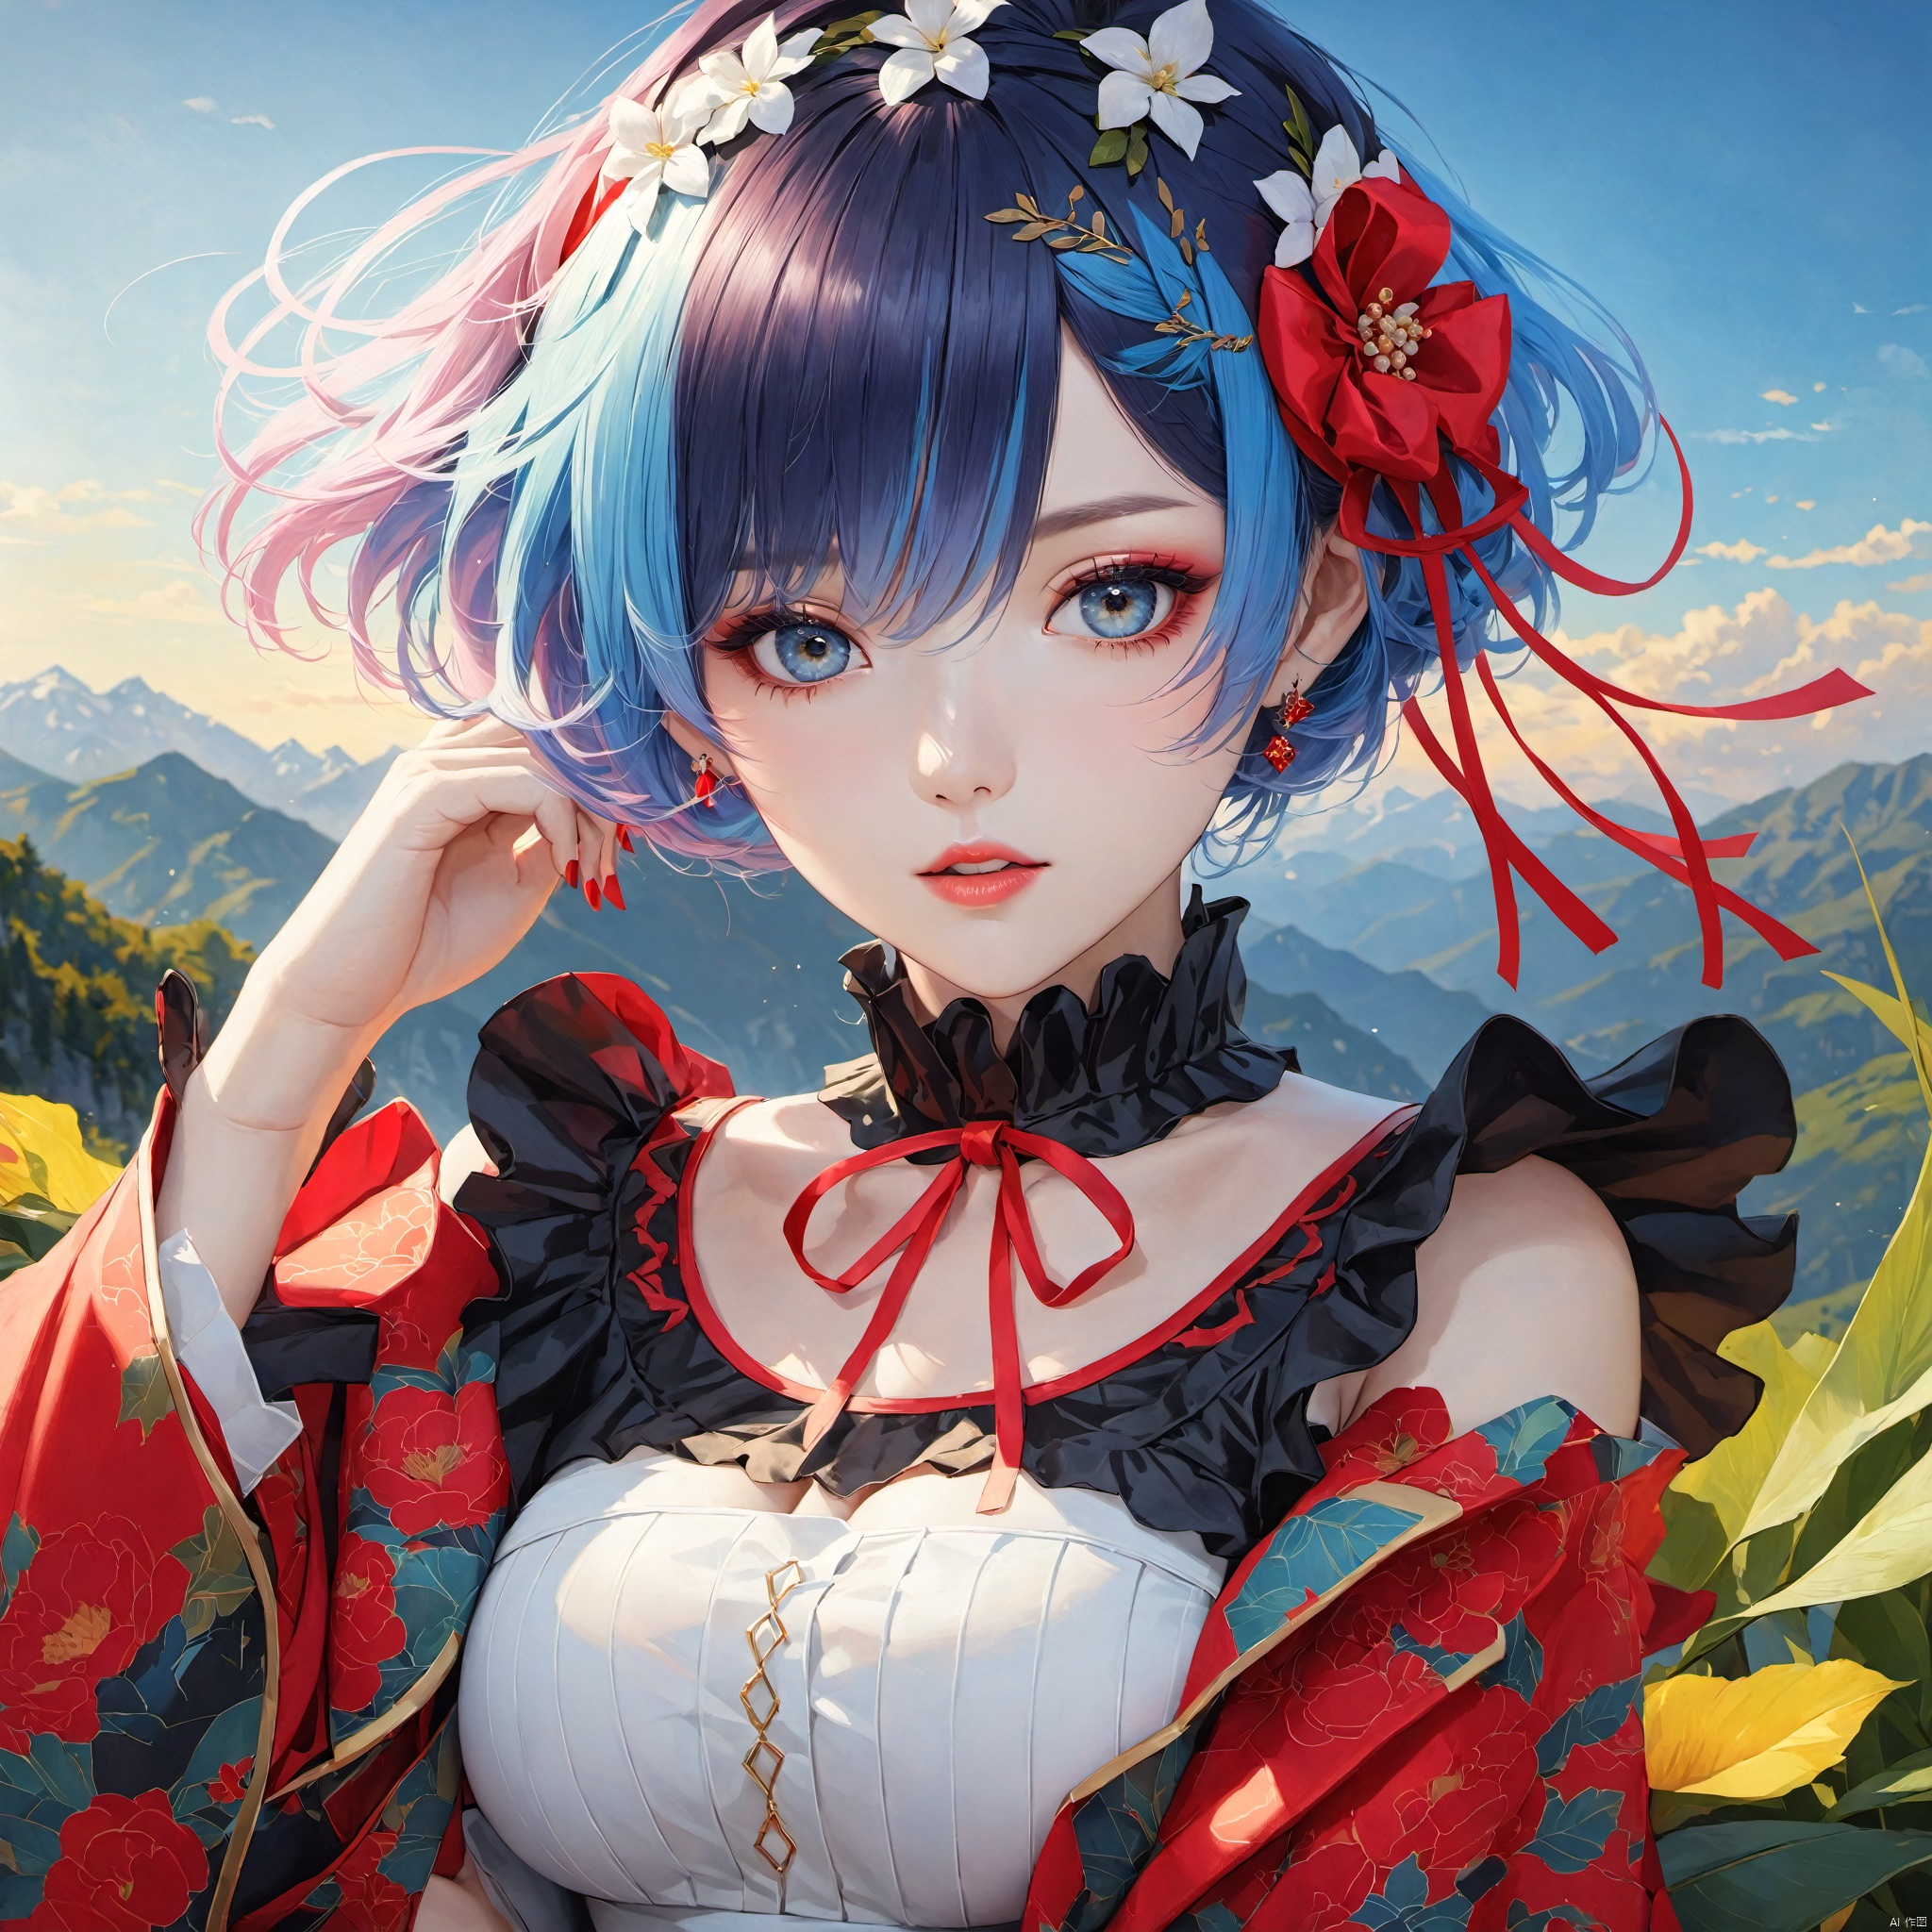  (realistic:1.3),masterpiece,best quality,masterpiece,best quality,realistic style,highest detailed,(rem:1.8),blue hair,
1 girl,black hair,big eyes,beatiful face,big breasts,Fashionable wave hairstyle, modern white-collar hairstyle, light makeup with a bright red lining, minimalist jewelry, wearing a low cut white short sleeved shirt, black short suit skirt, high heels
Landscape, Mountains, Nature, Clouds, Nature, Leisure, Illustration